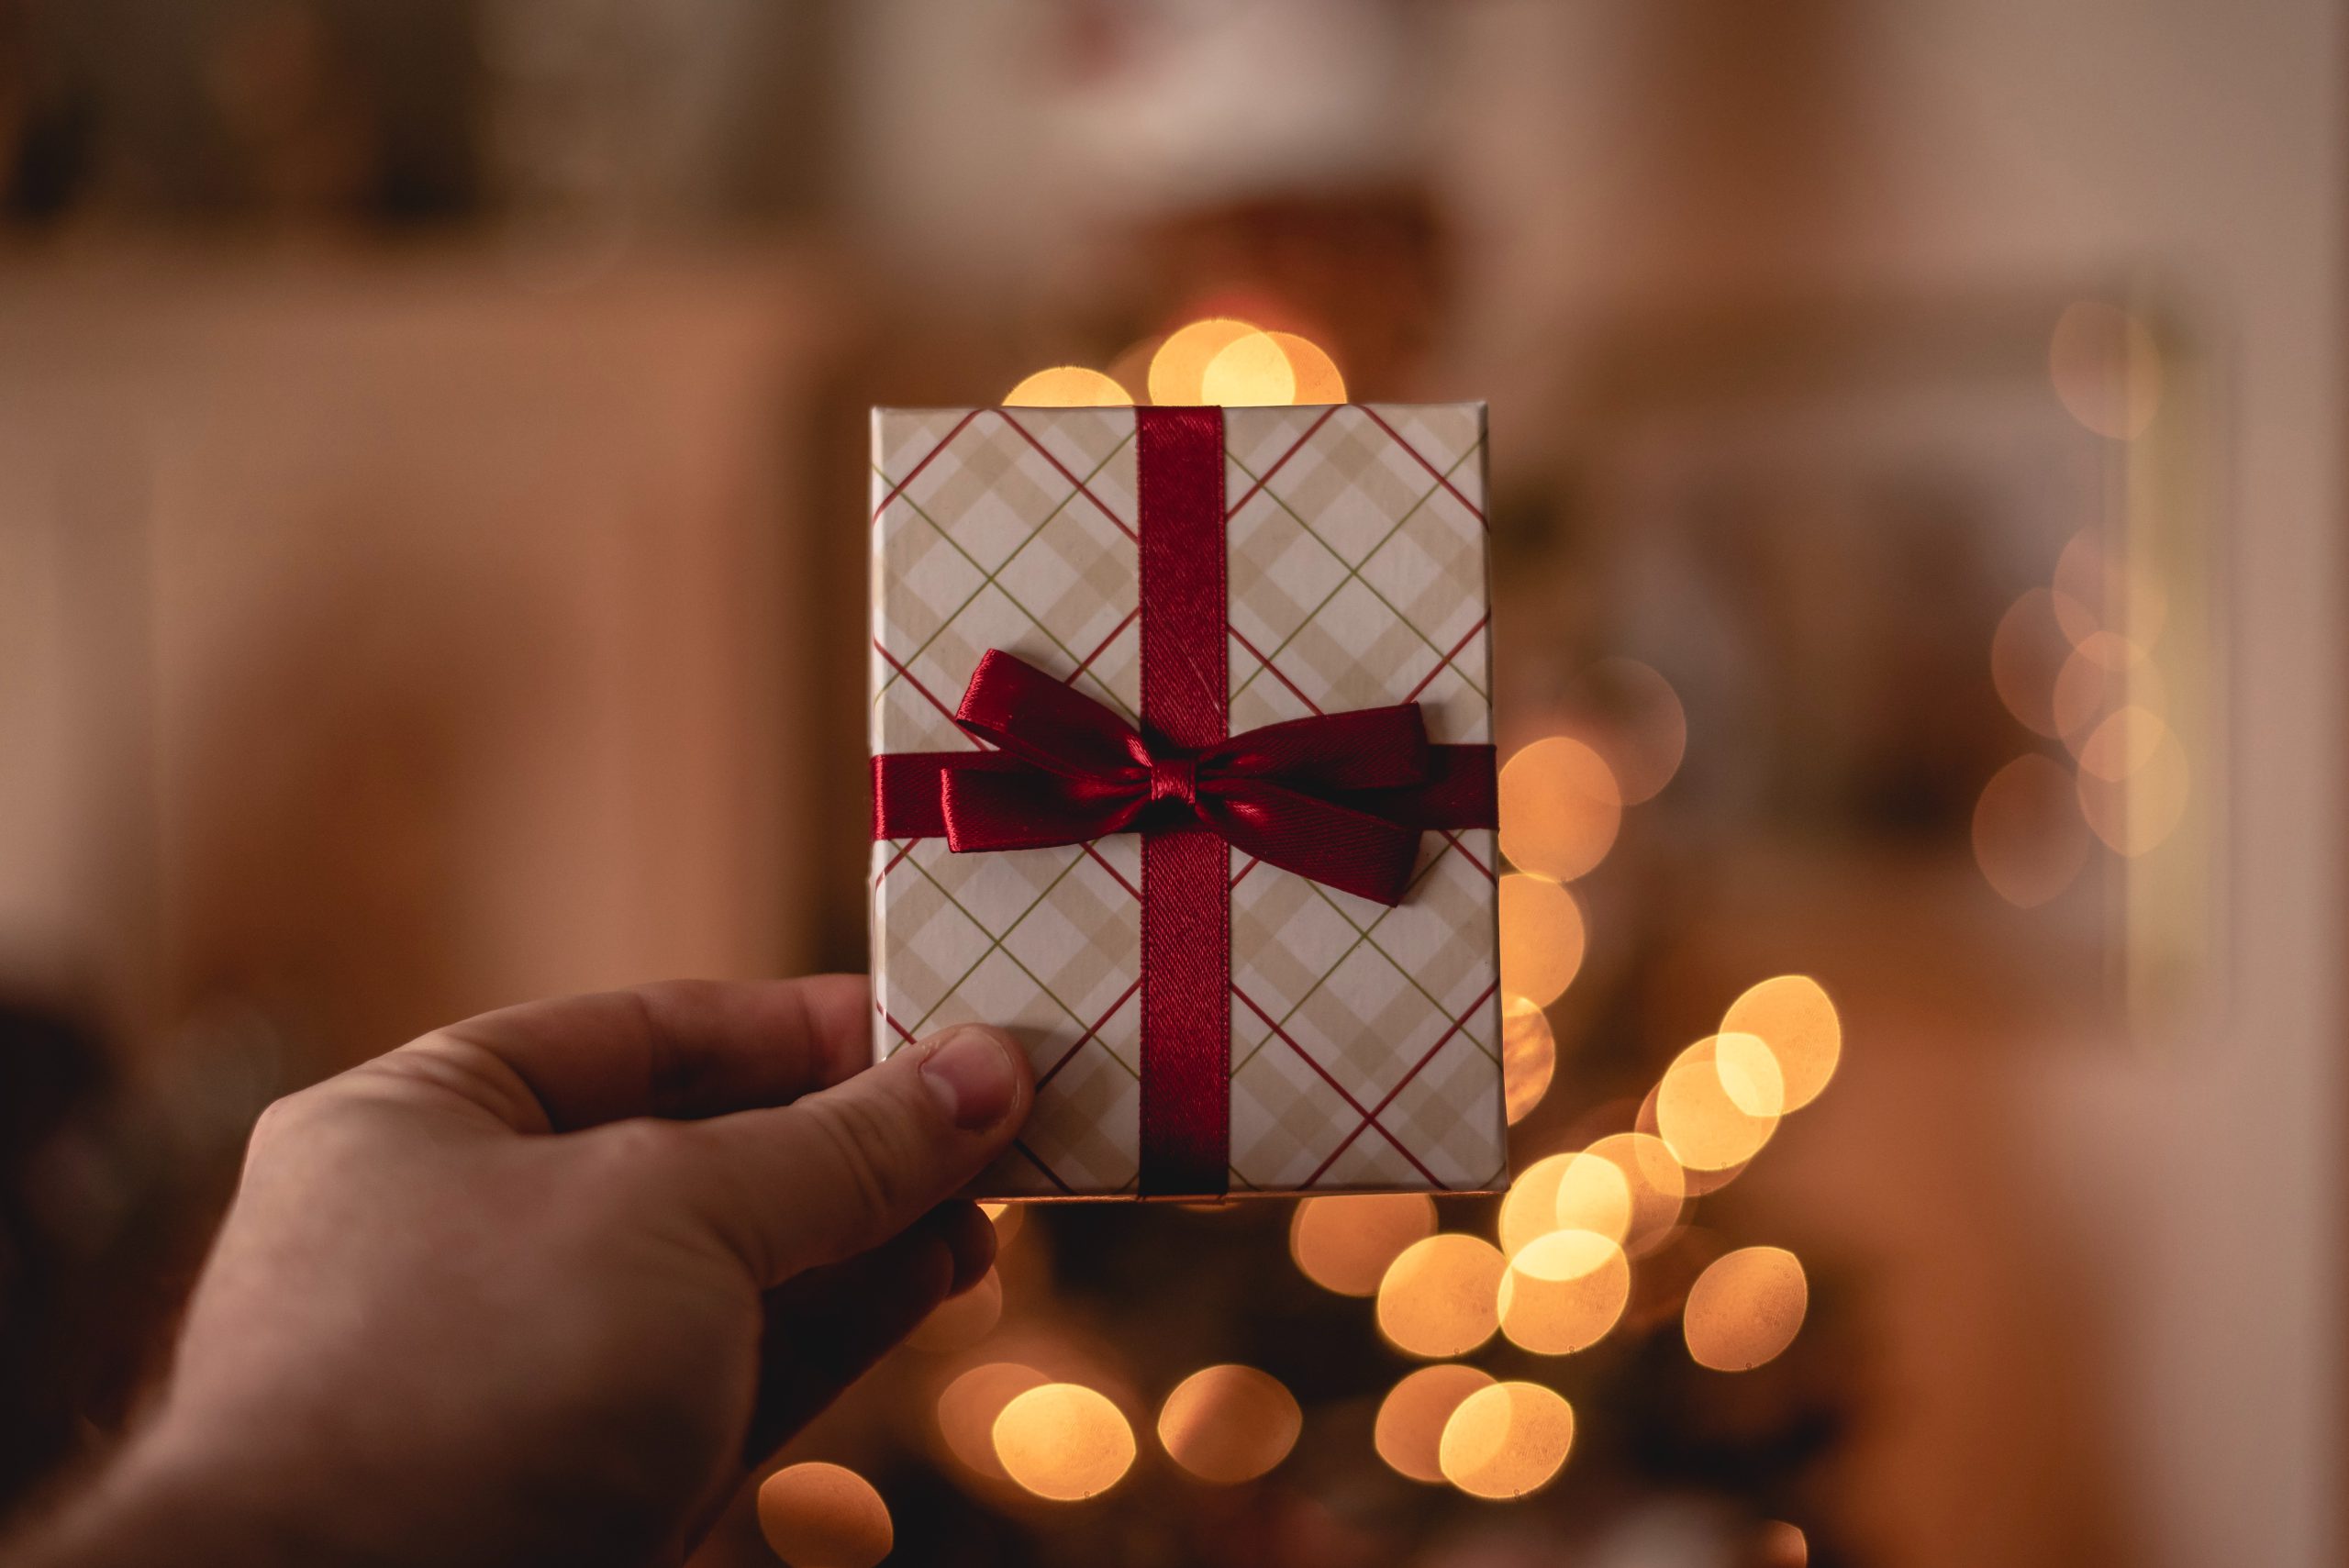 hand holding a wrapped gift card with red bow